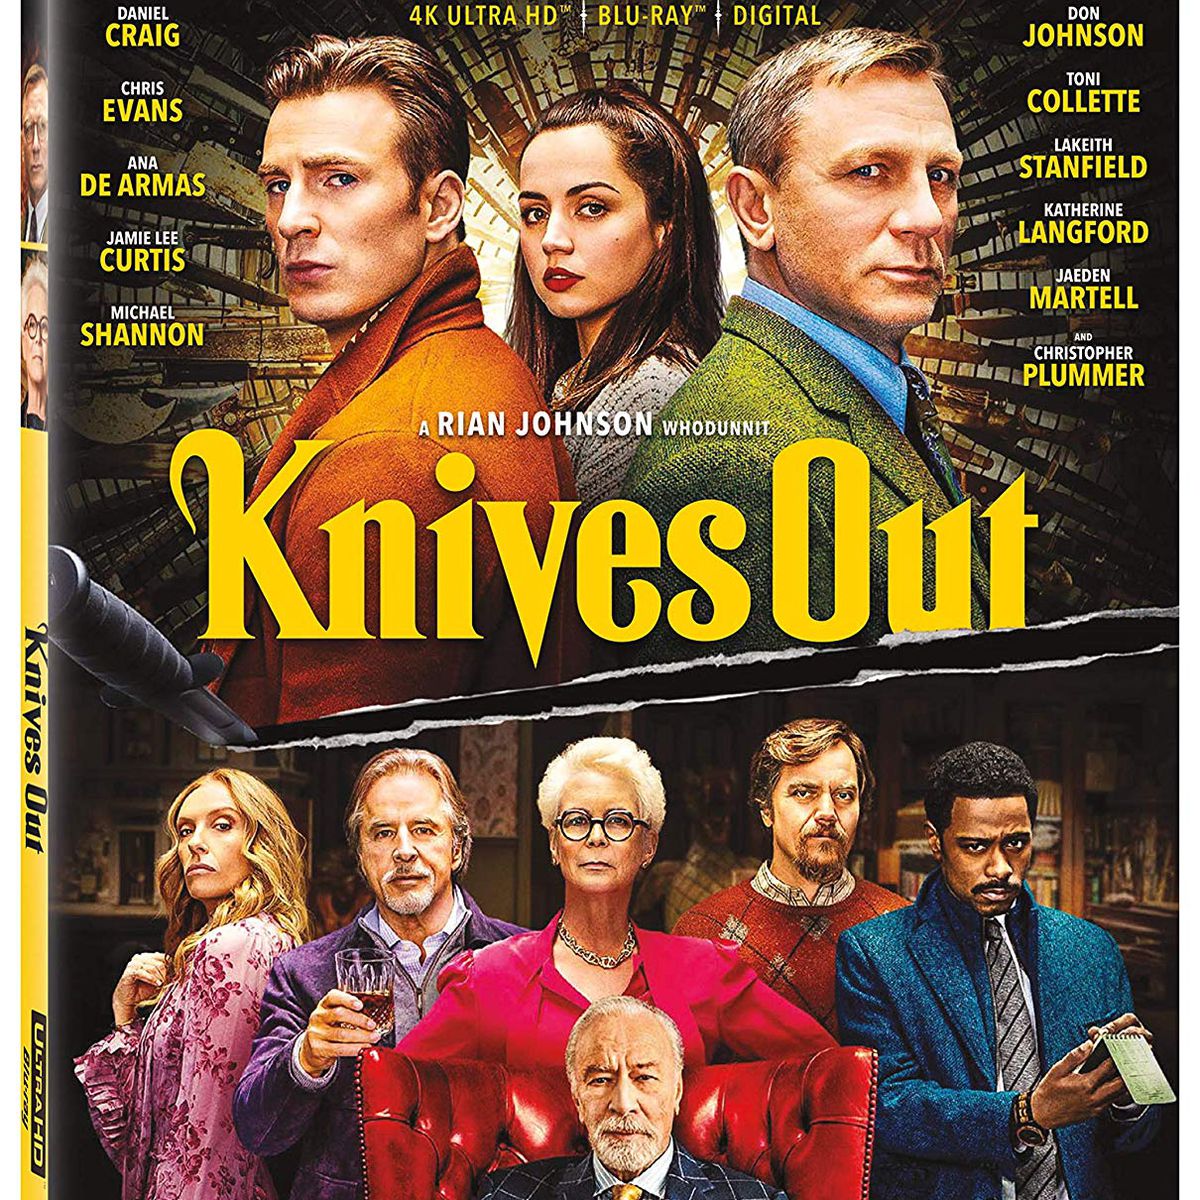 Cover art for the Knives Out 4K Blu-ray.